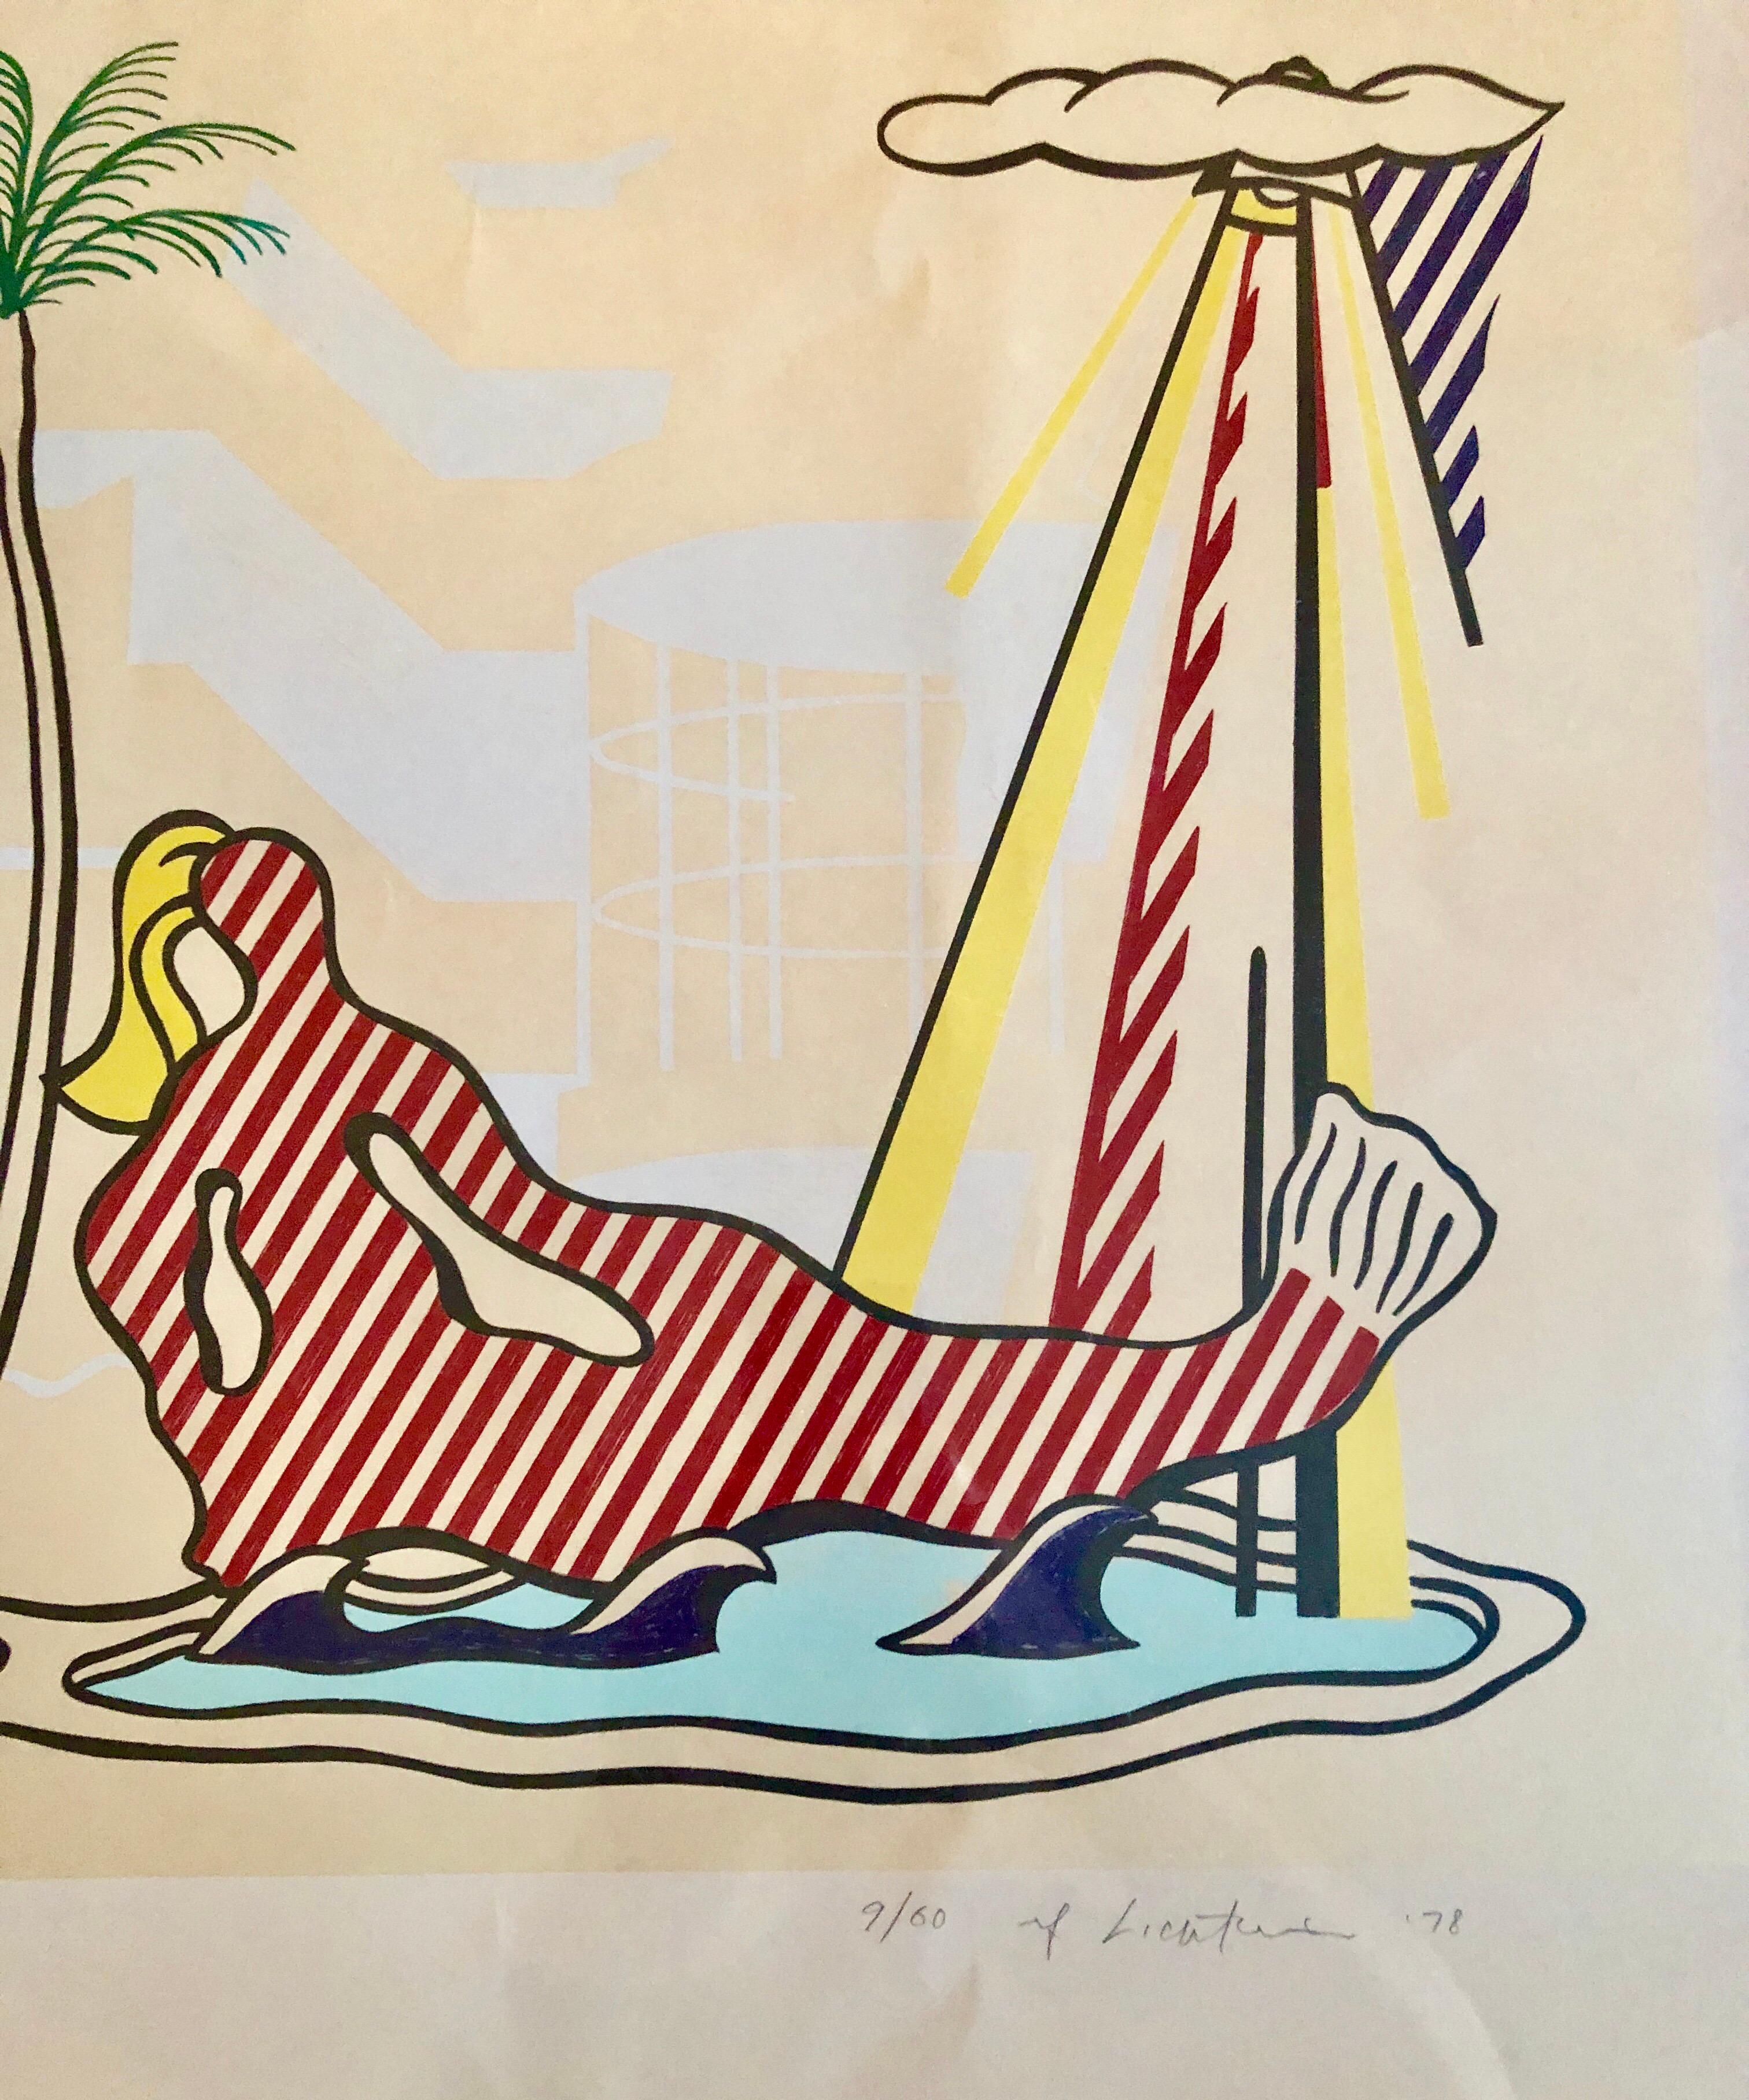 Roy Lichtenstein Mermaid Original lithograph on Arches paper
from the estate of one of the original donors to the sculpture. 
8 Color litho on paper. Artwork depicts a Pop Art mermaid image from the artist original  mockup rendering. Rare special